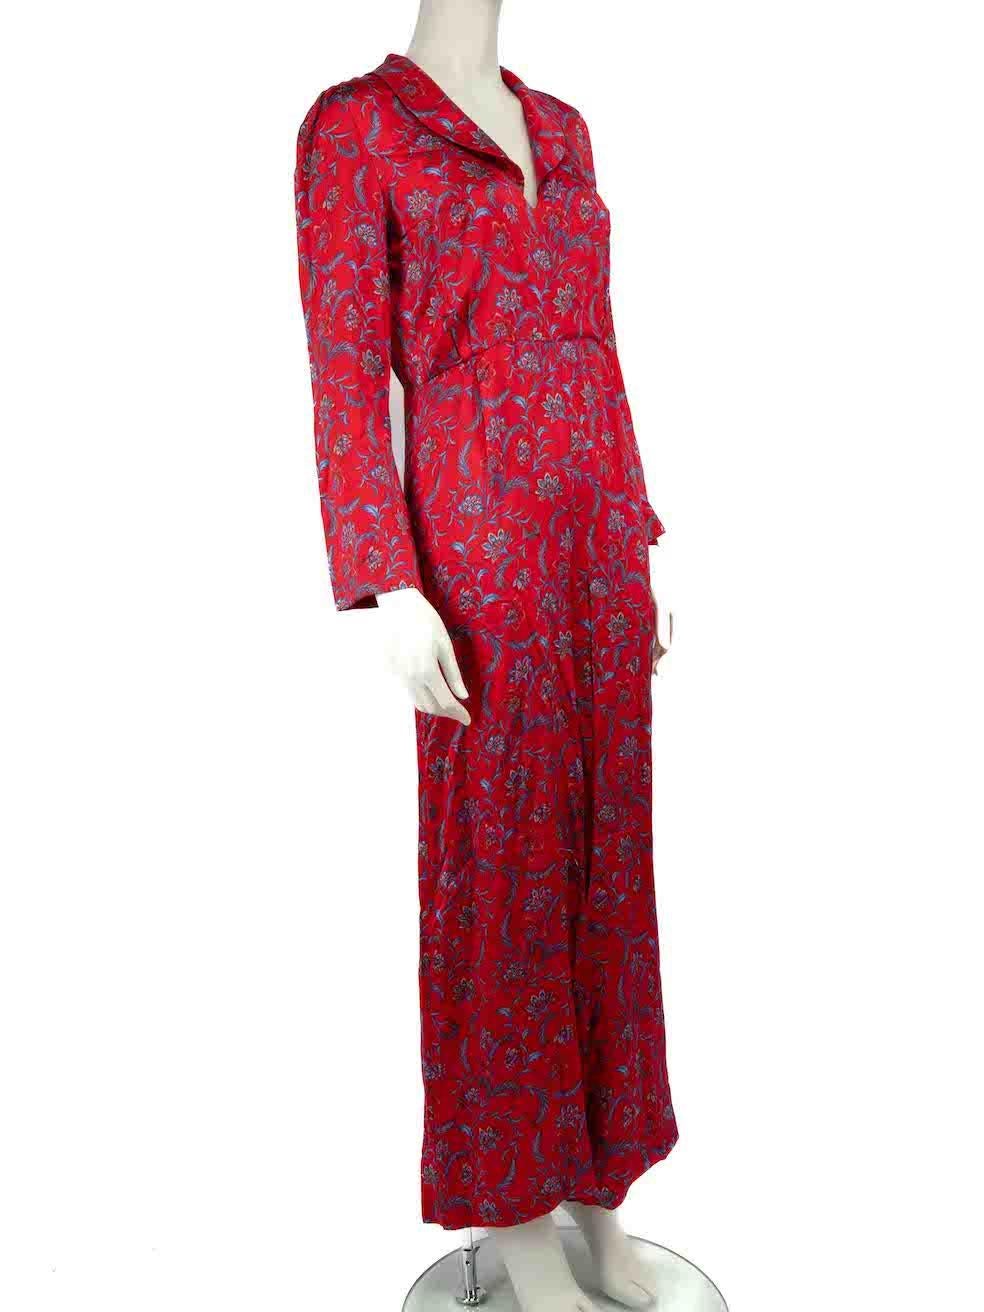 CONDITION is Very good. Hardly any visible wear to jumpsuit is evident. However, the composition label has been removed on this used Seren designer resale item.
 
 
 
 Details
 
 
 Red
 
 Silk
 
 Jumpsuit
 
 Floral pattern
 
 Long sleeves
 
 V-neck
